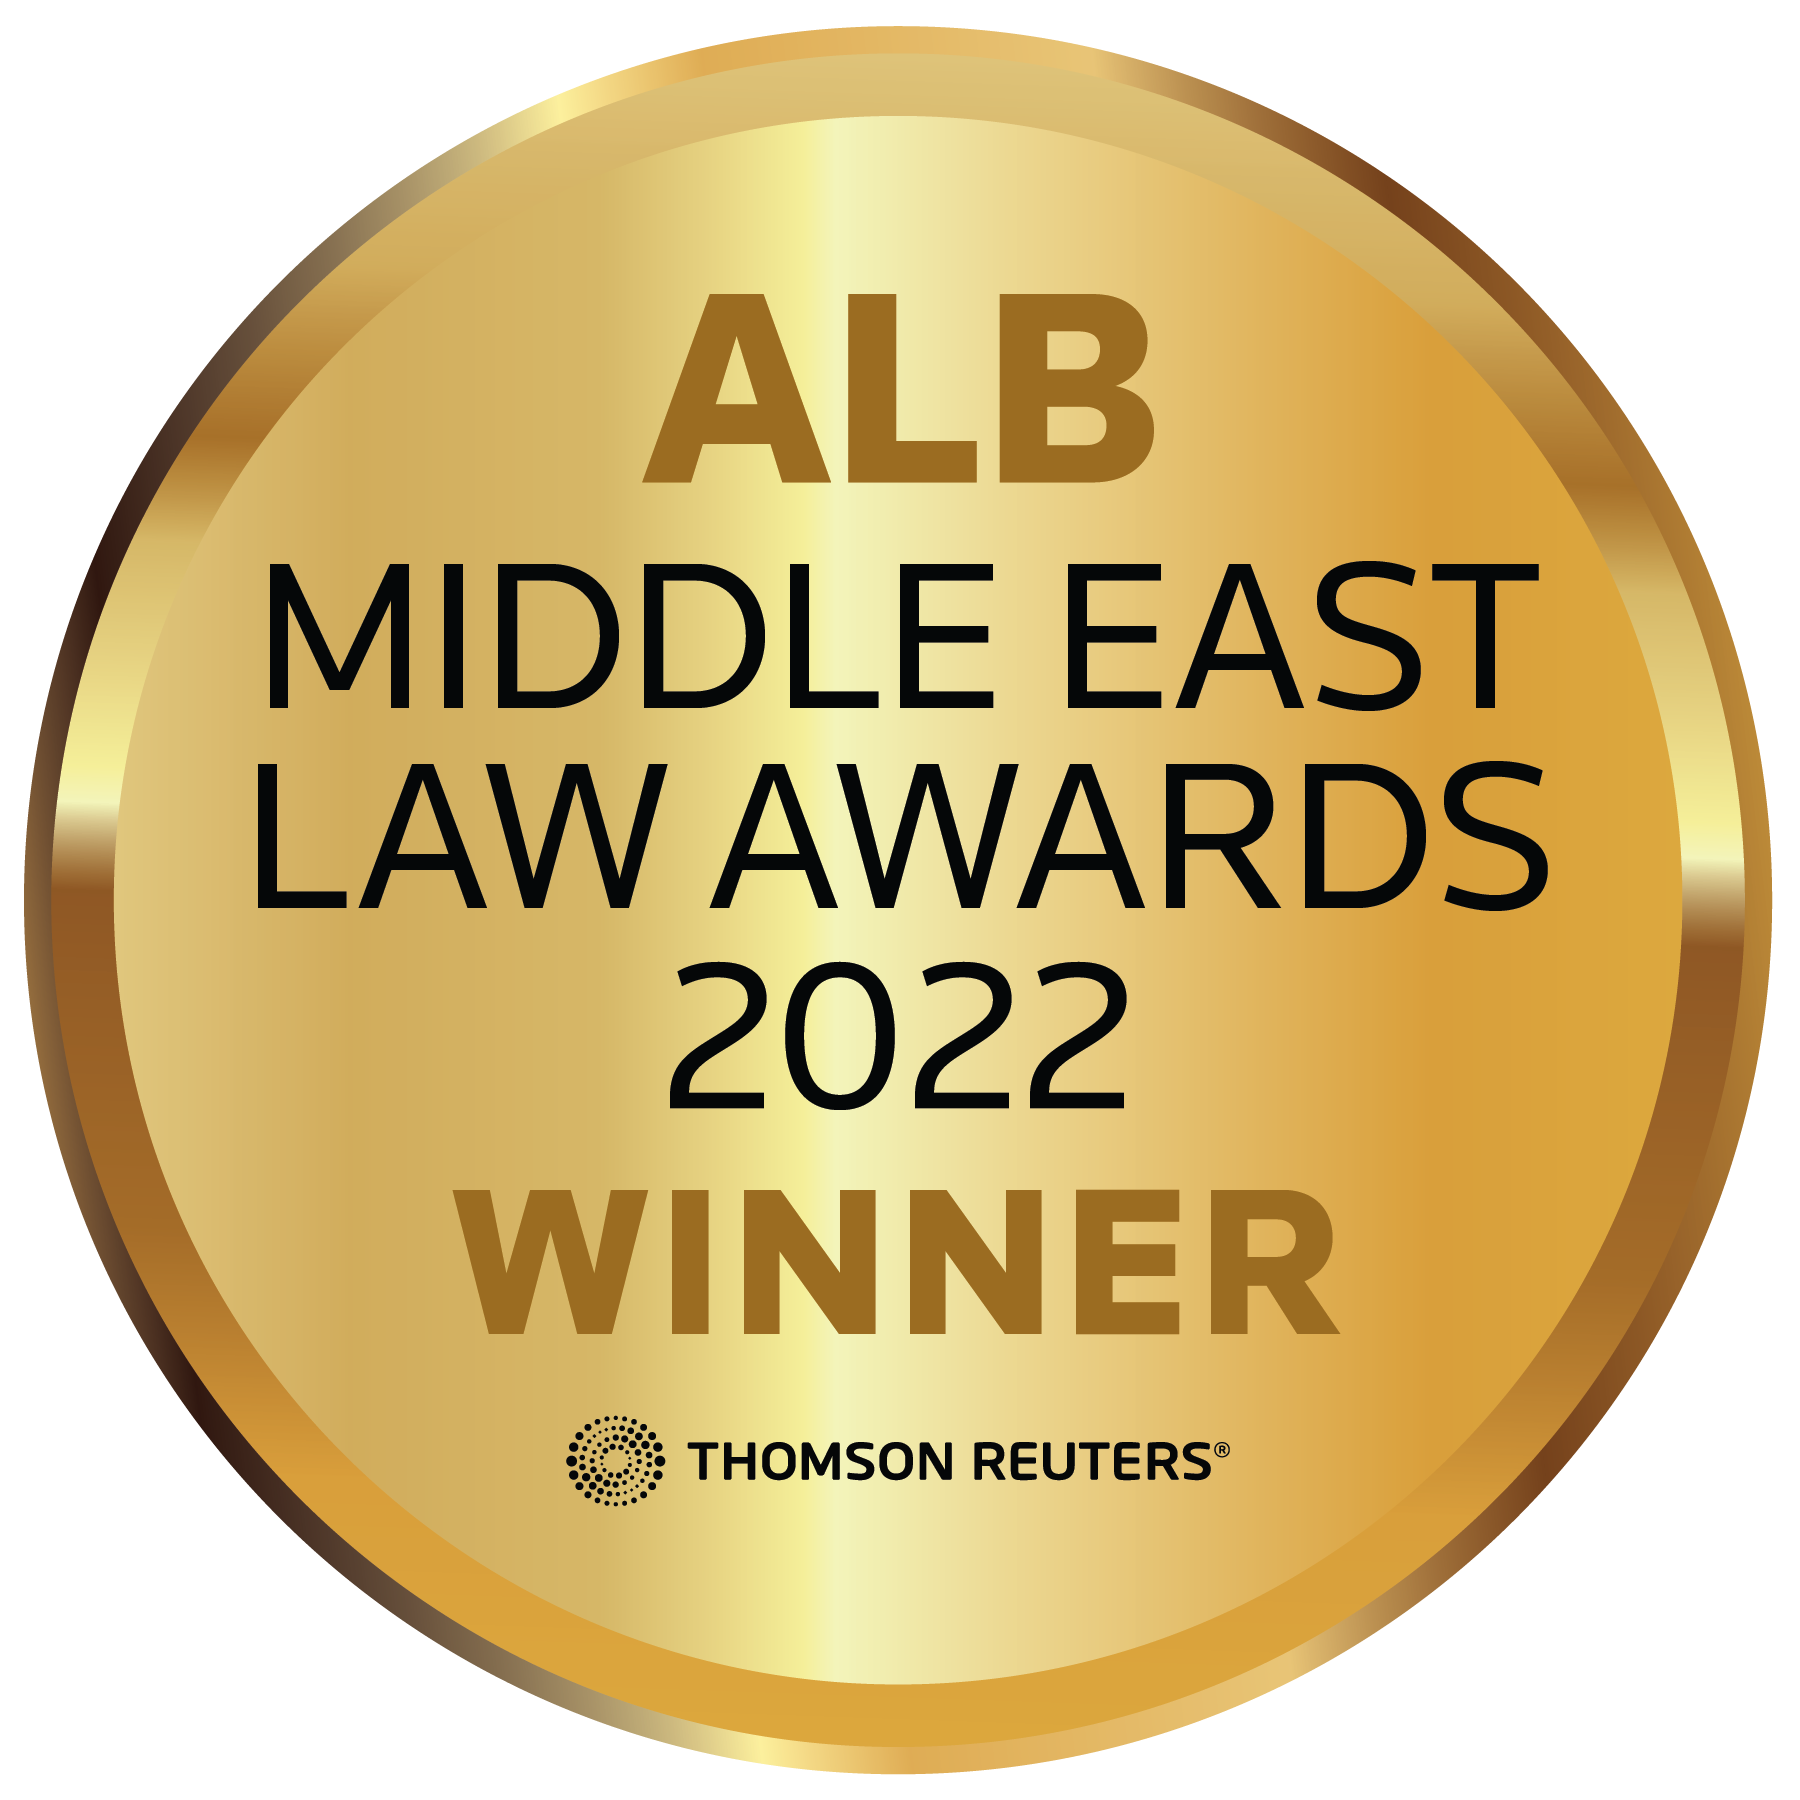 Lebanon Law Firm of the Year